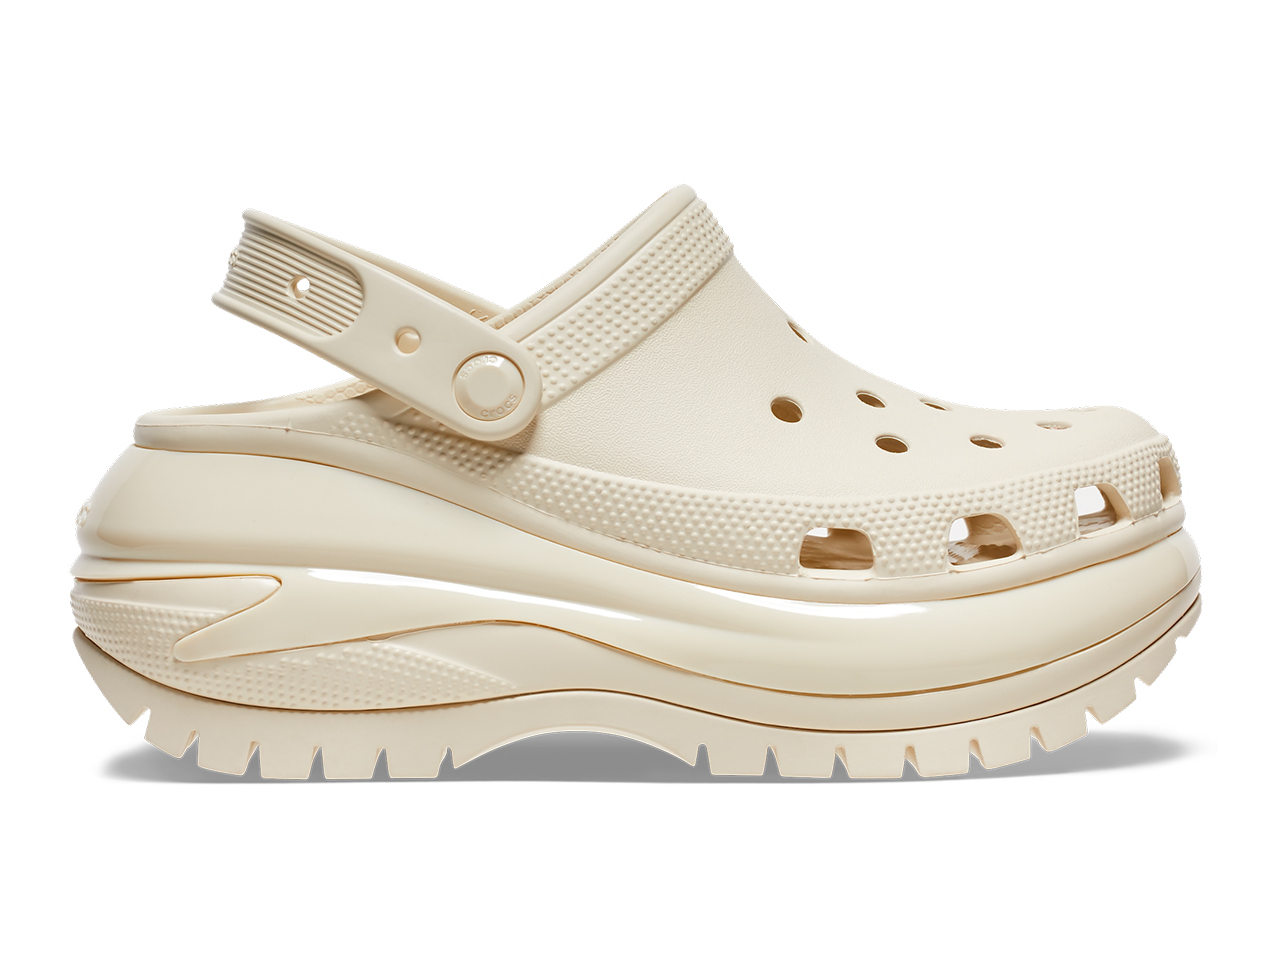 A side profile of a pair of cream platform clogs from Crocs.